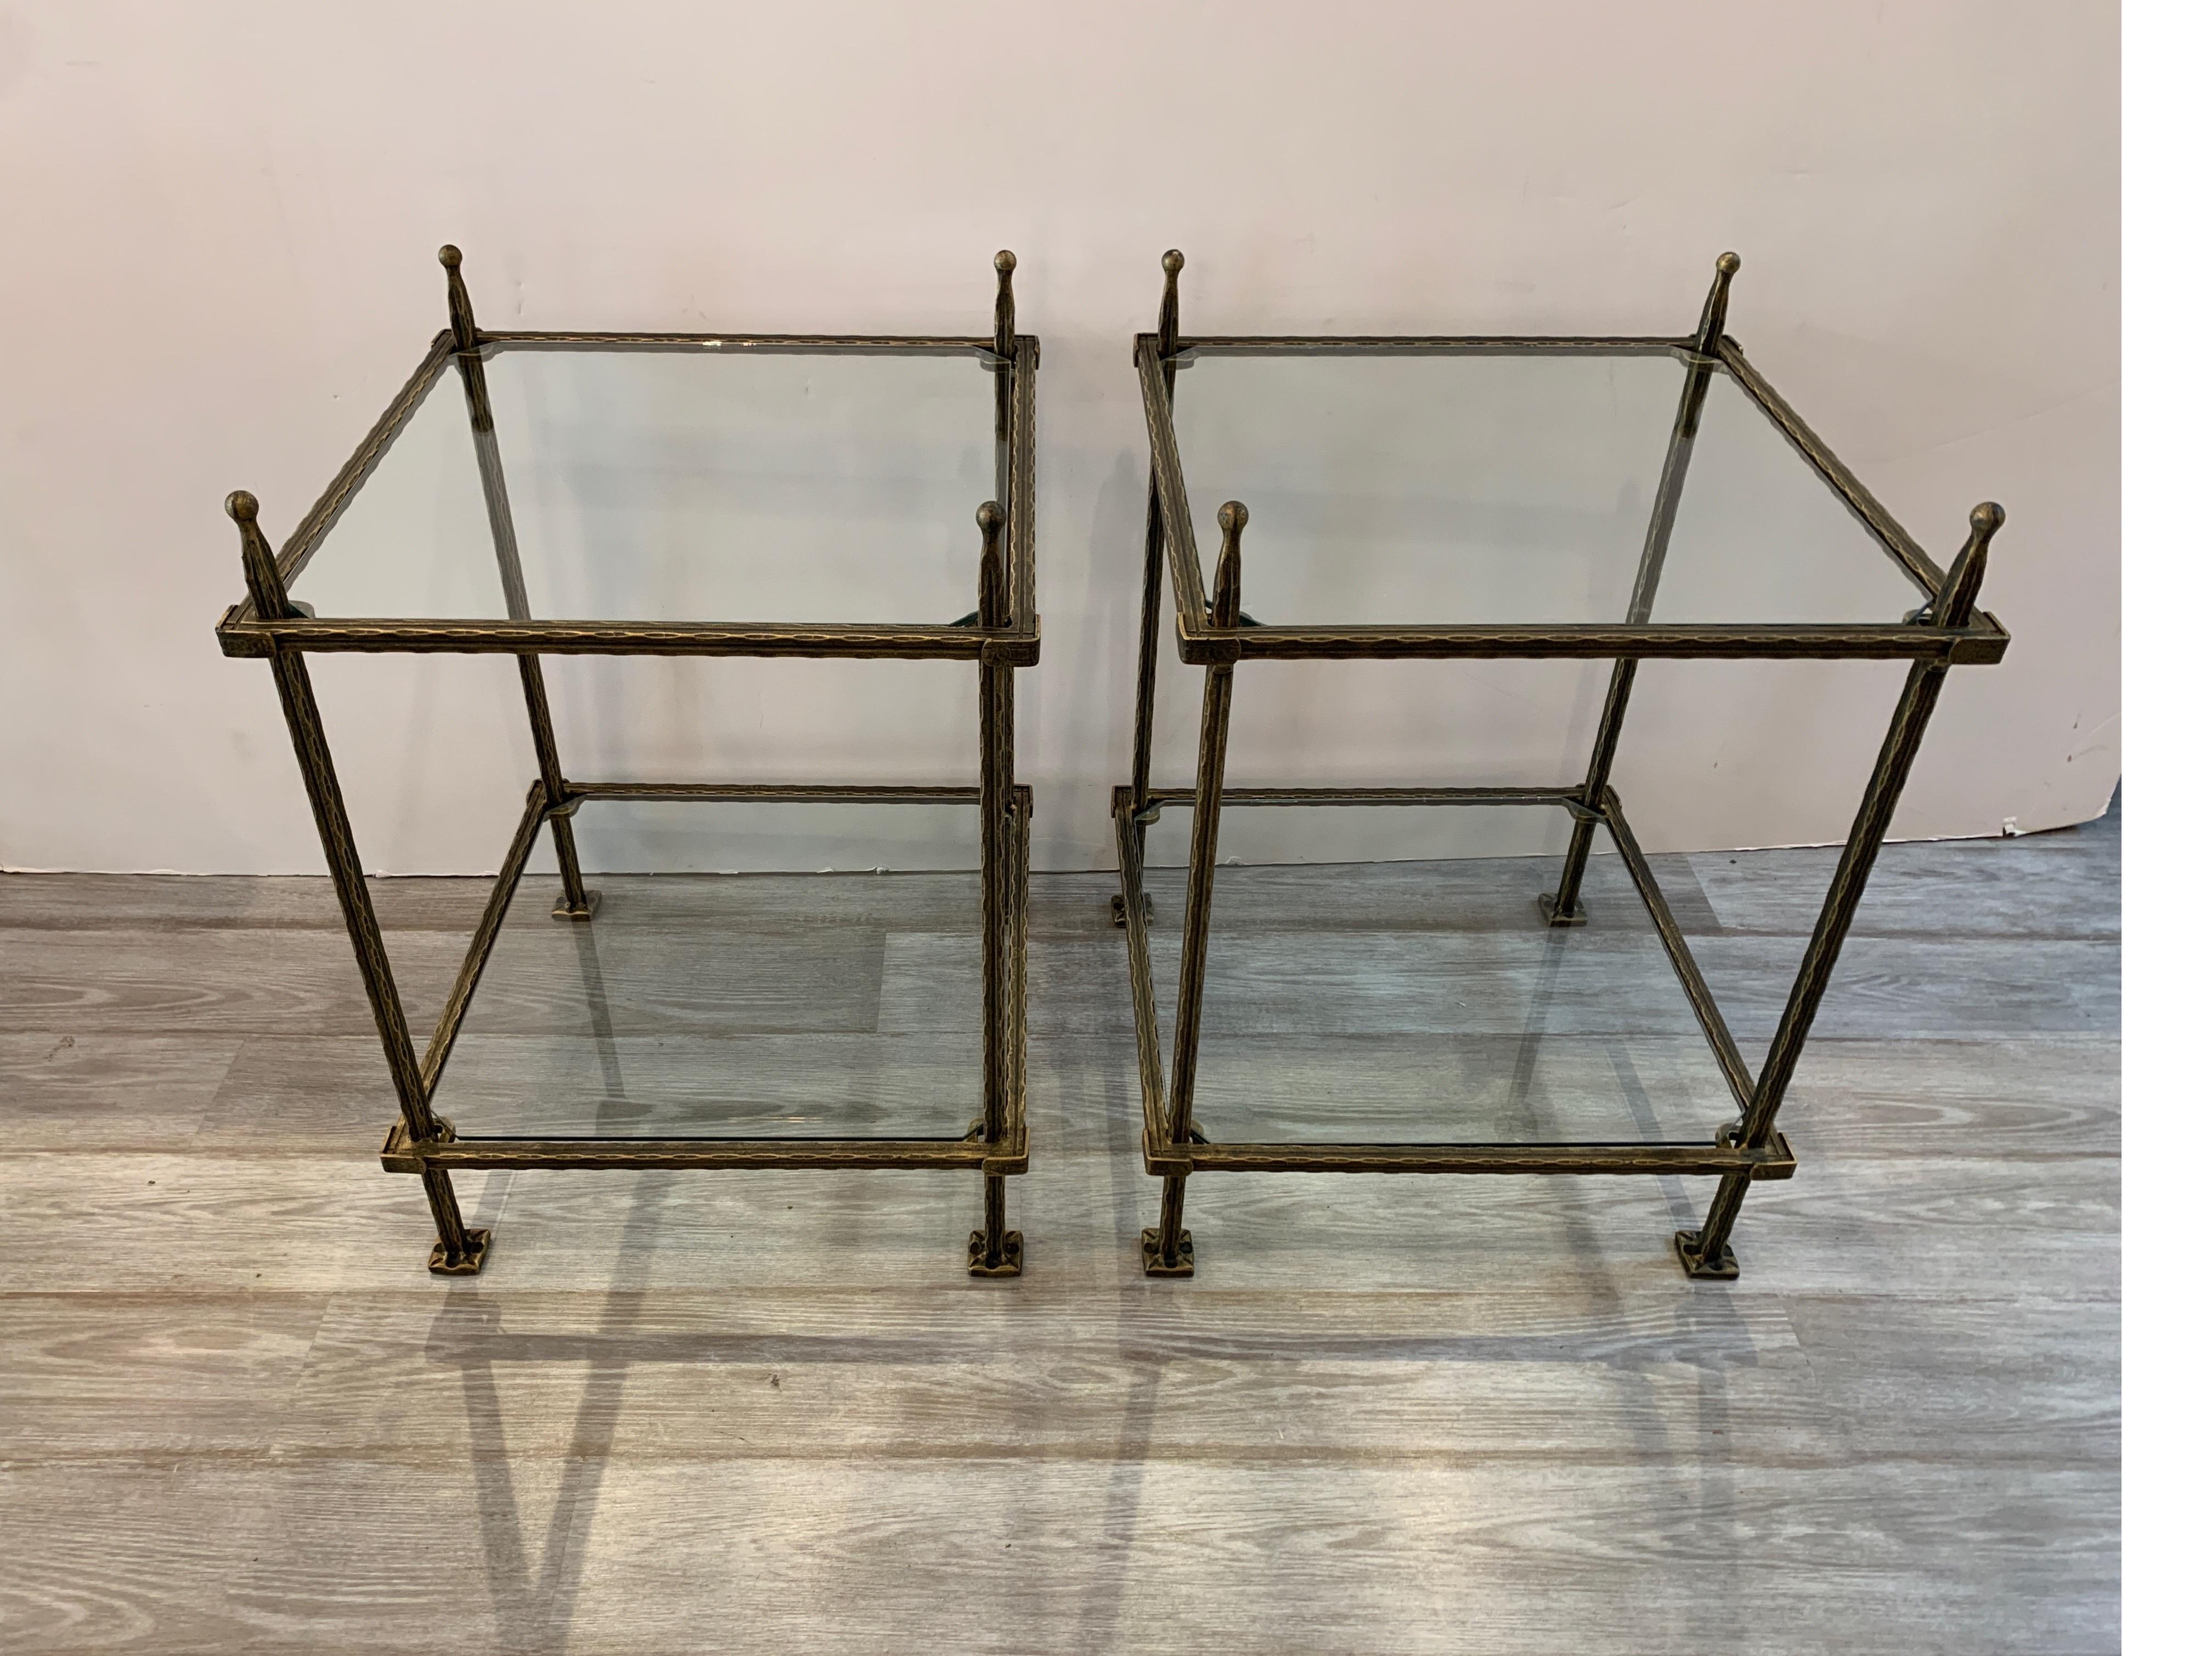 A pair of bronzed finish two tiered tables with glass tops. The frames with a gilt and black washed finish. By Italian maker Claudio Rayes, 1970s The height to the top glass tier is 25 inches, the top of the table with finial is 28 inches.